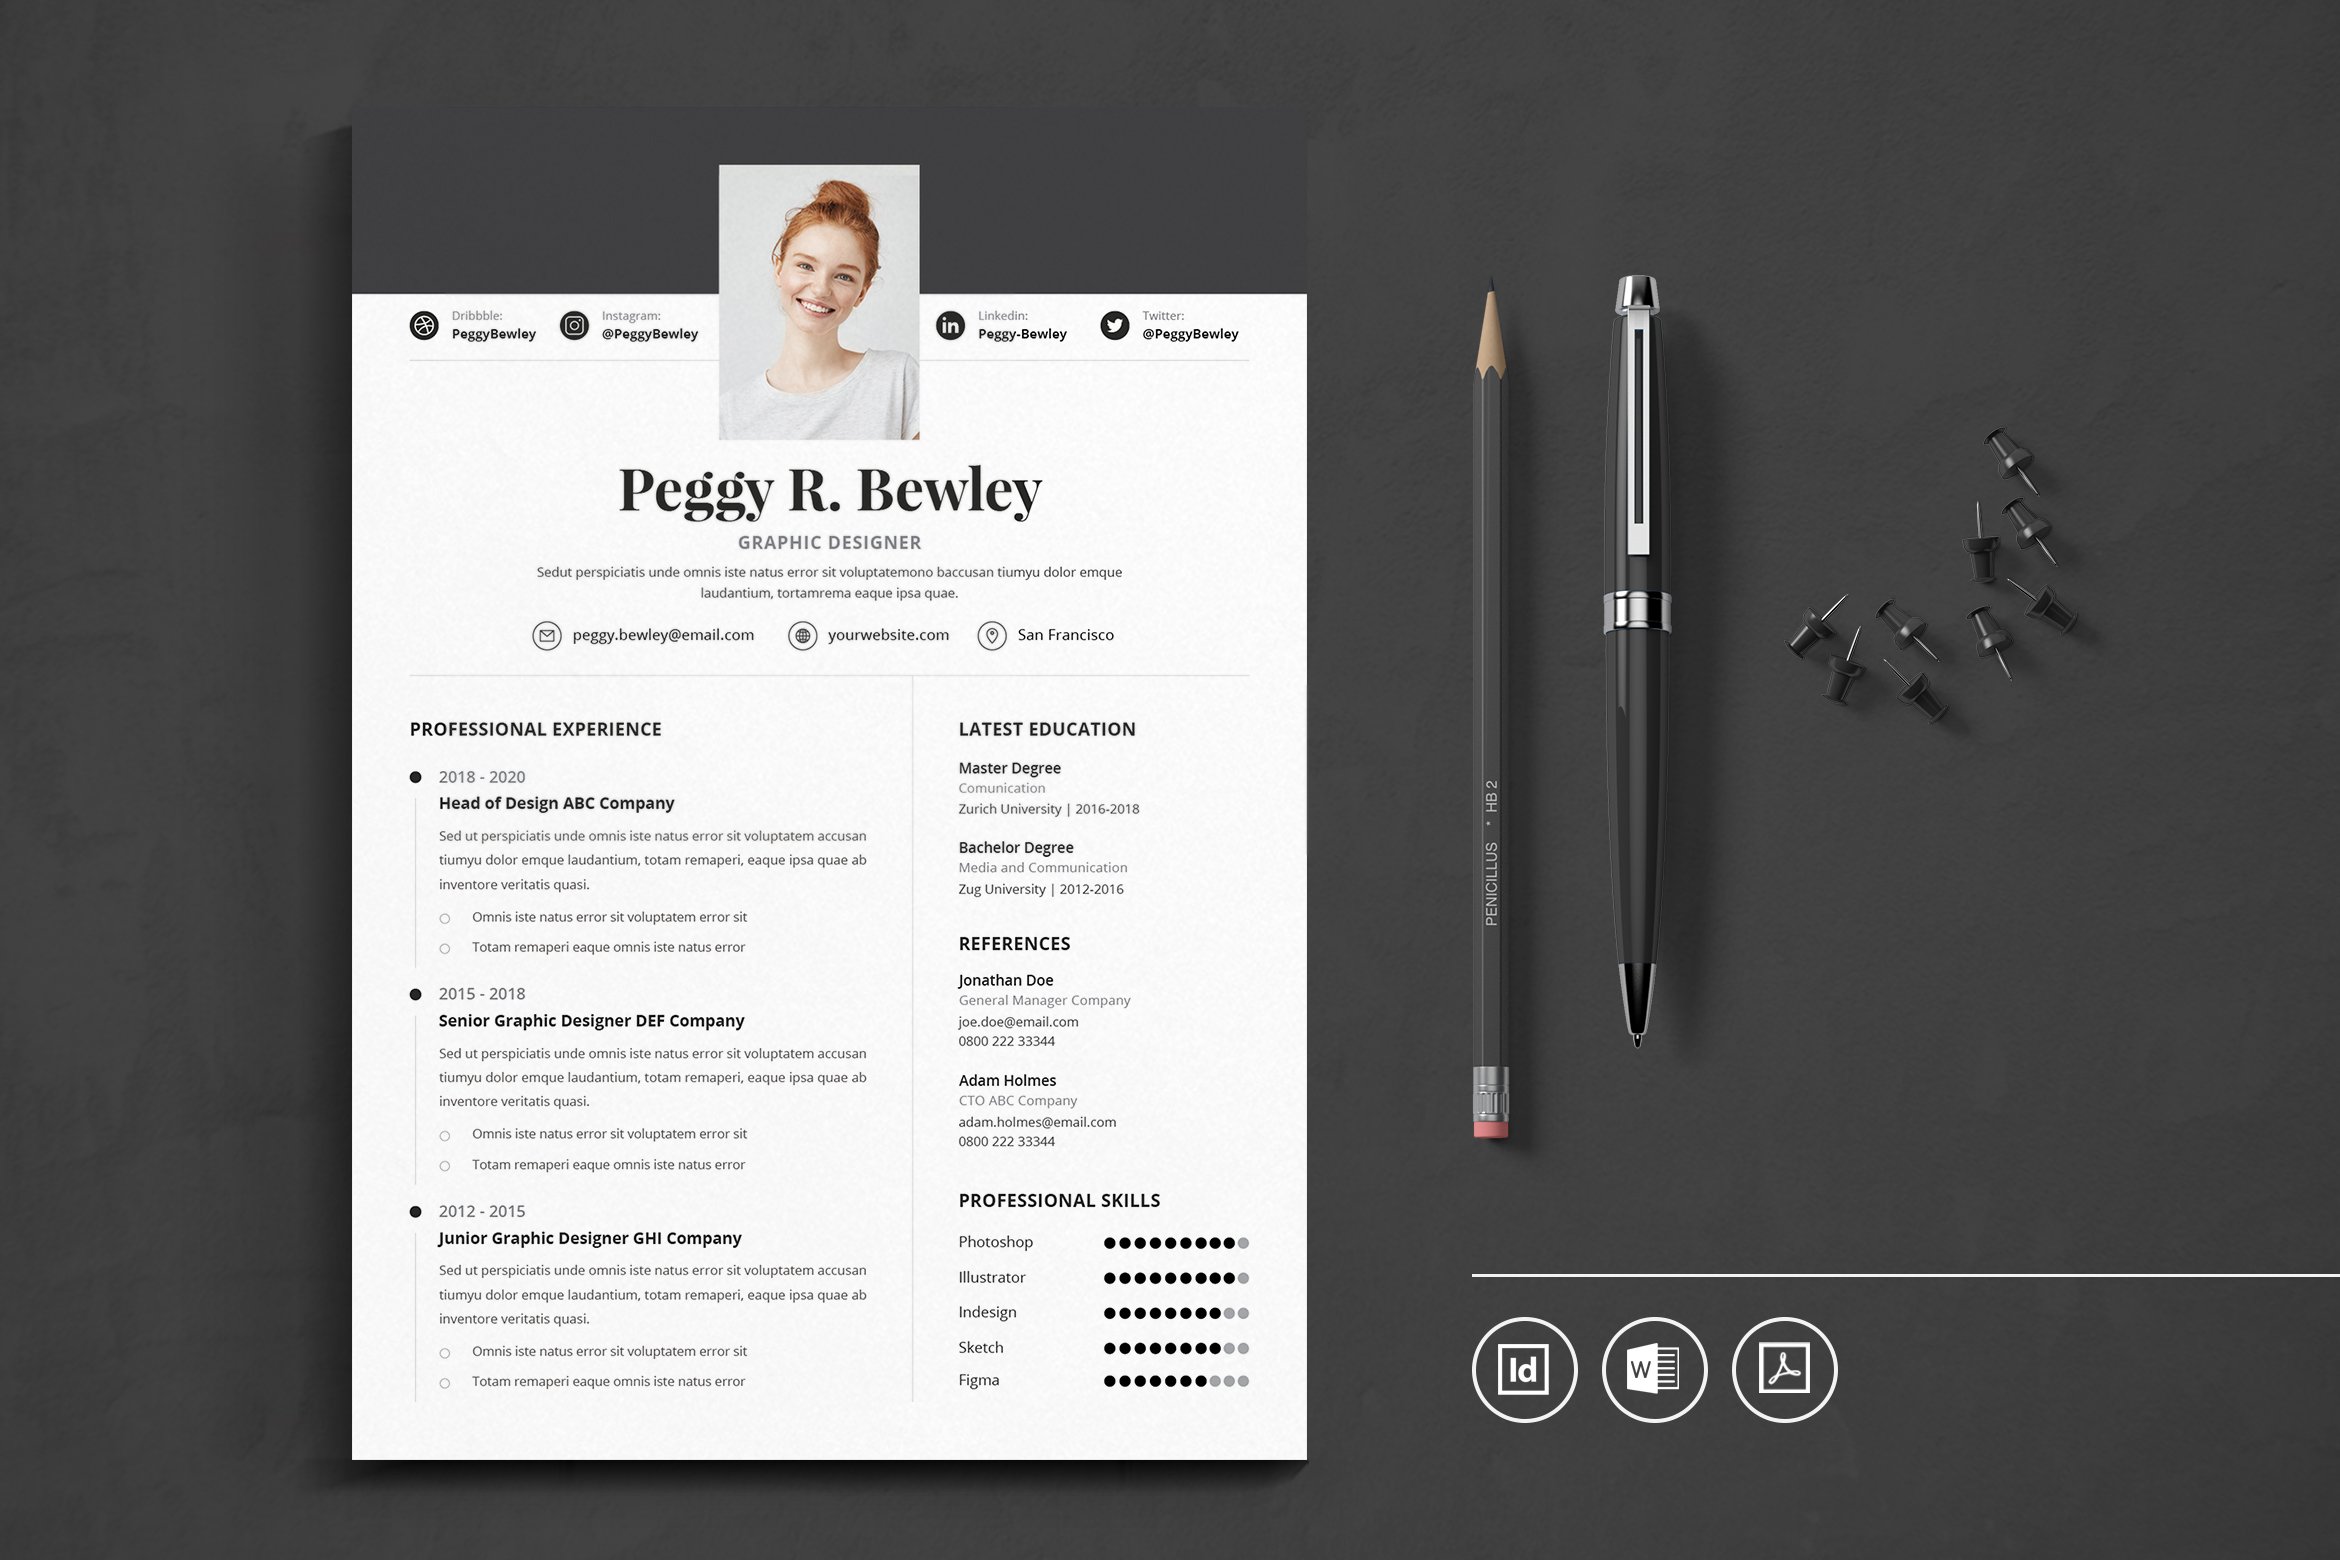 Use this resume template for your career.